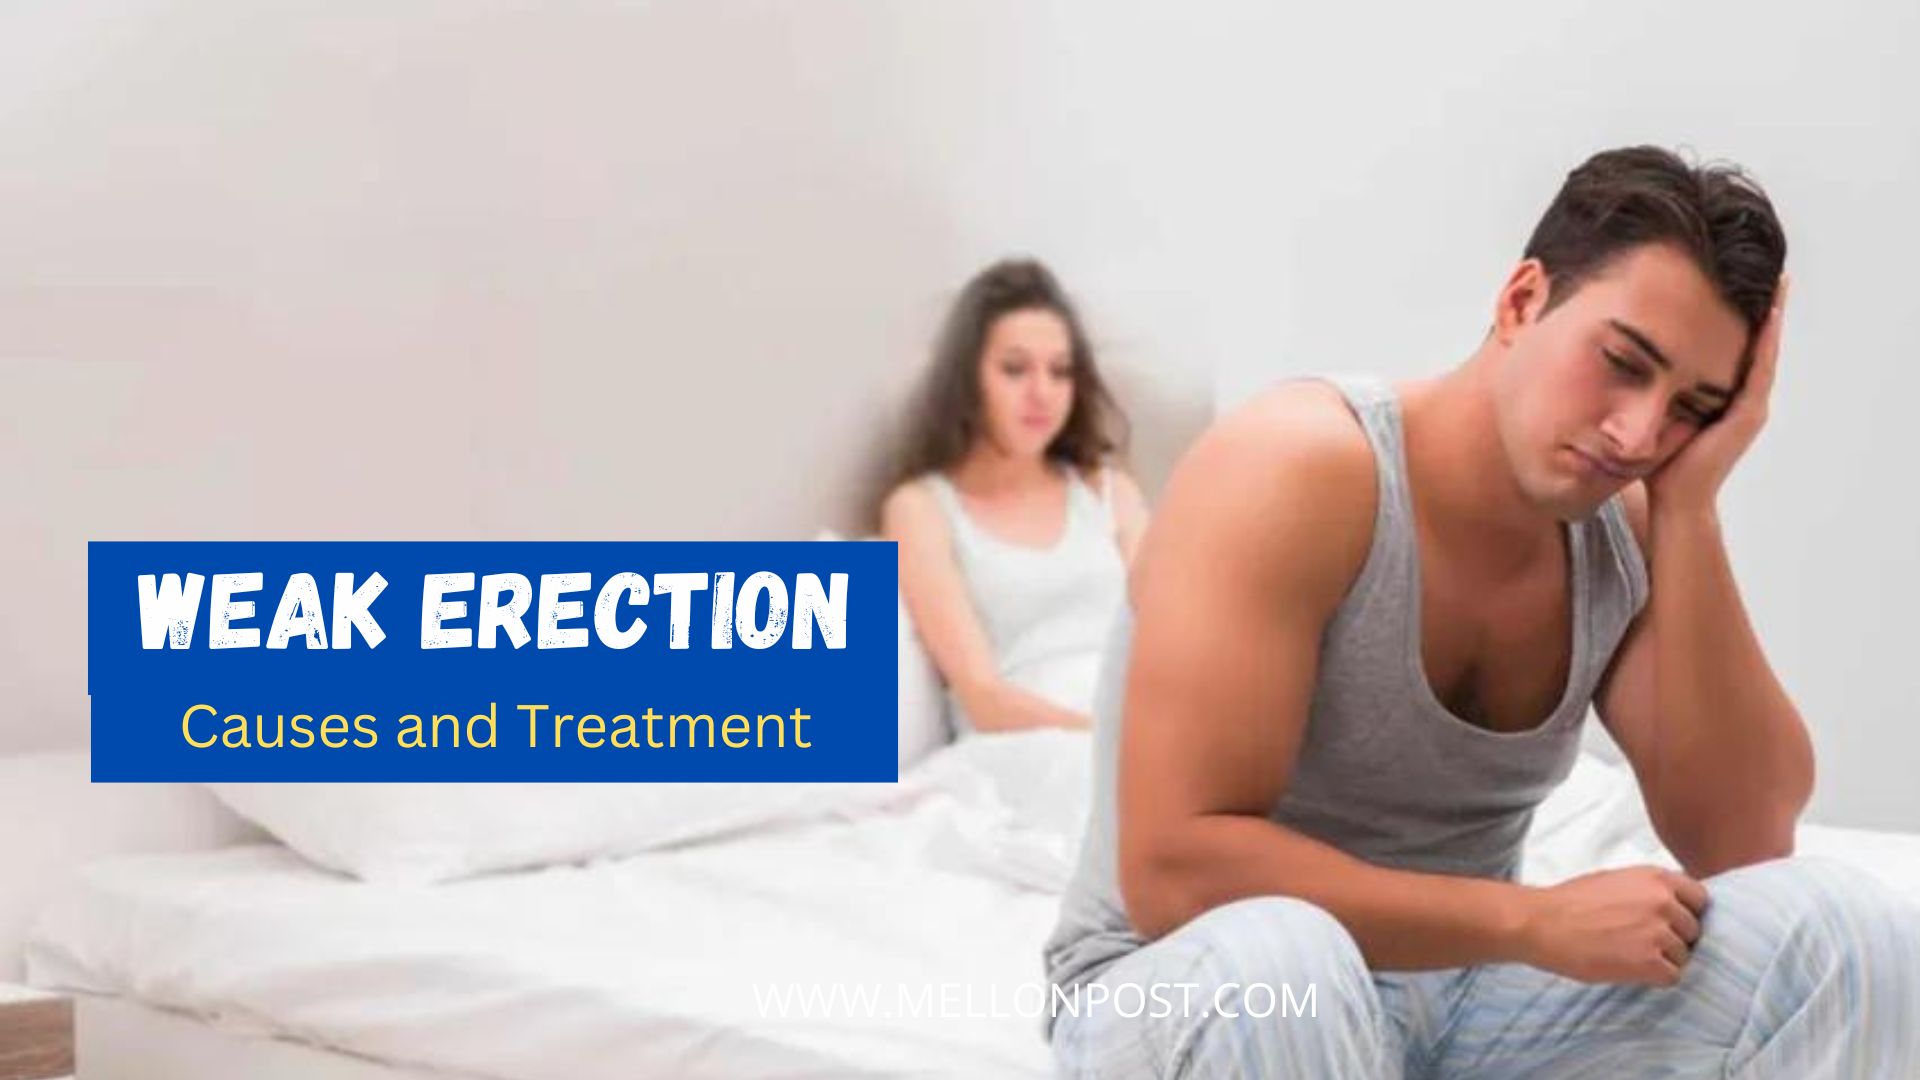 The Hidden Causes and Treatment For Weak Erection